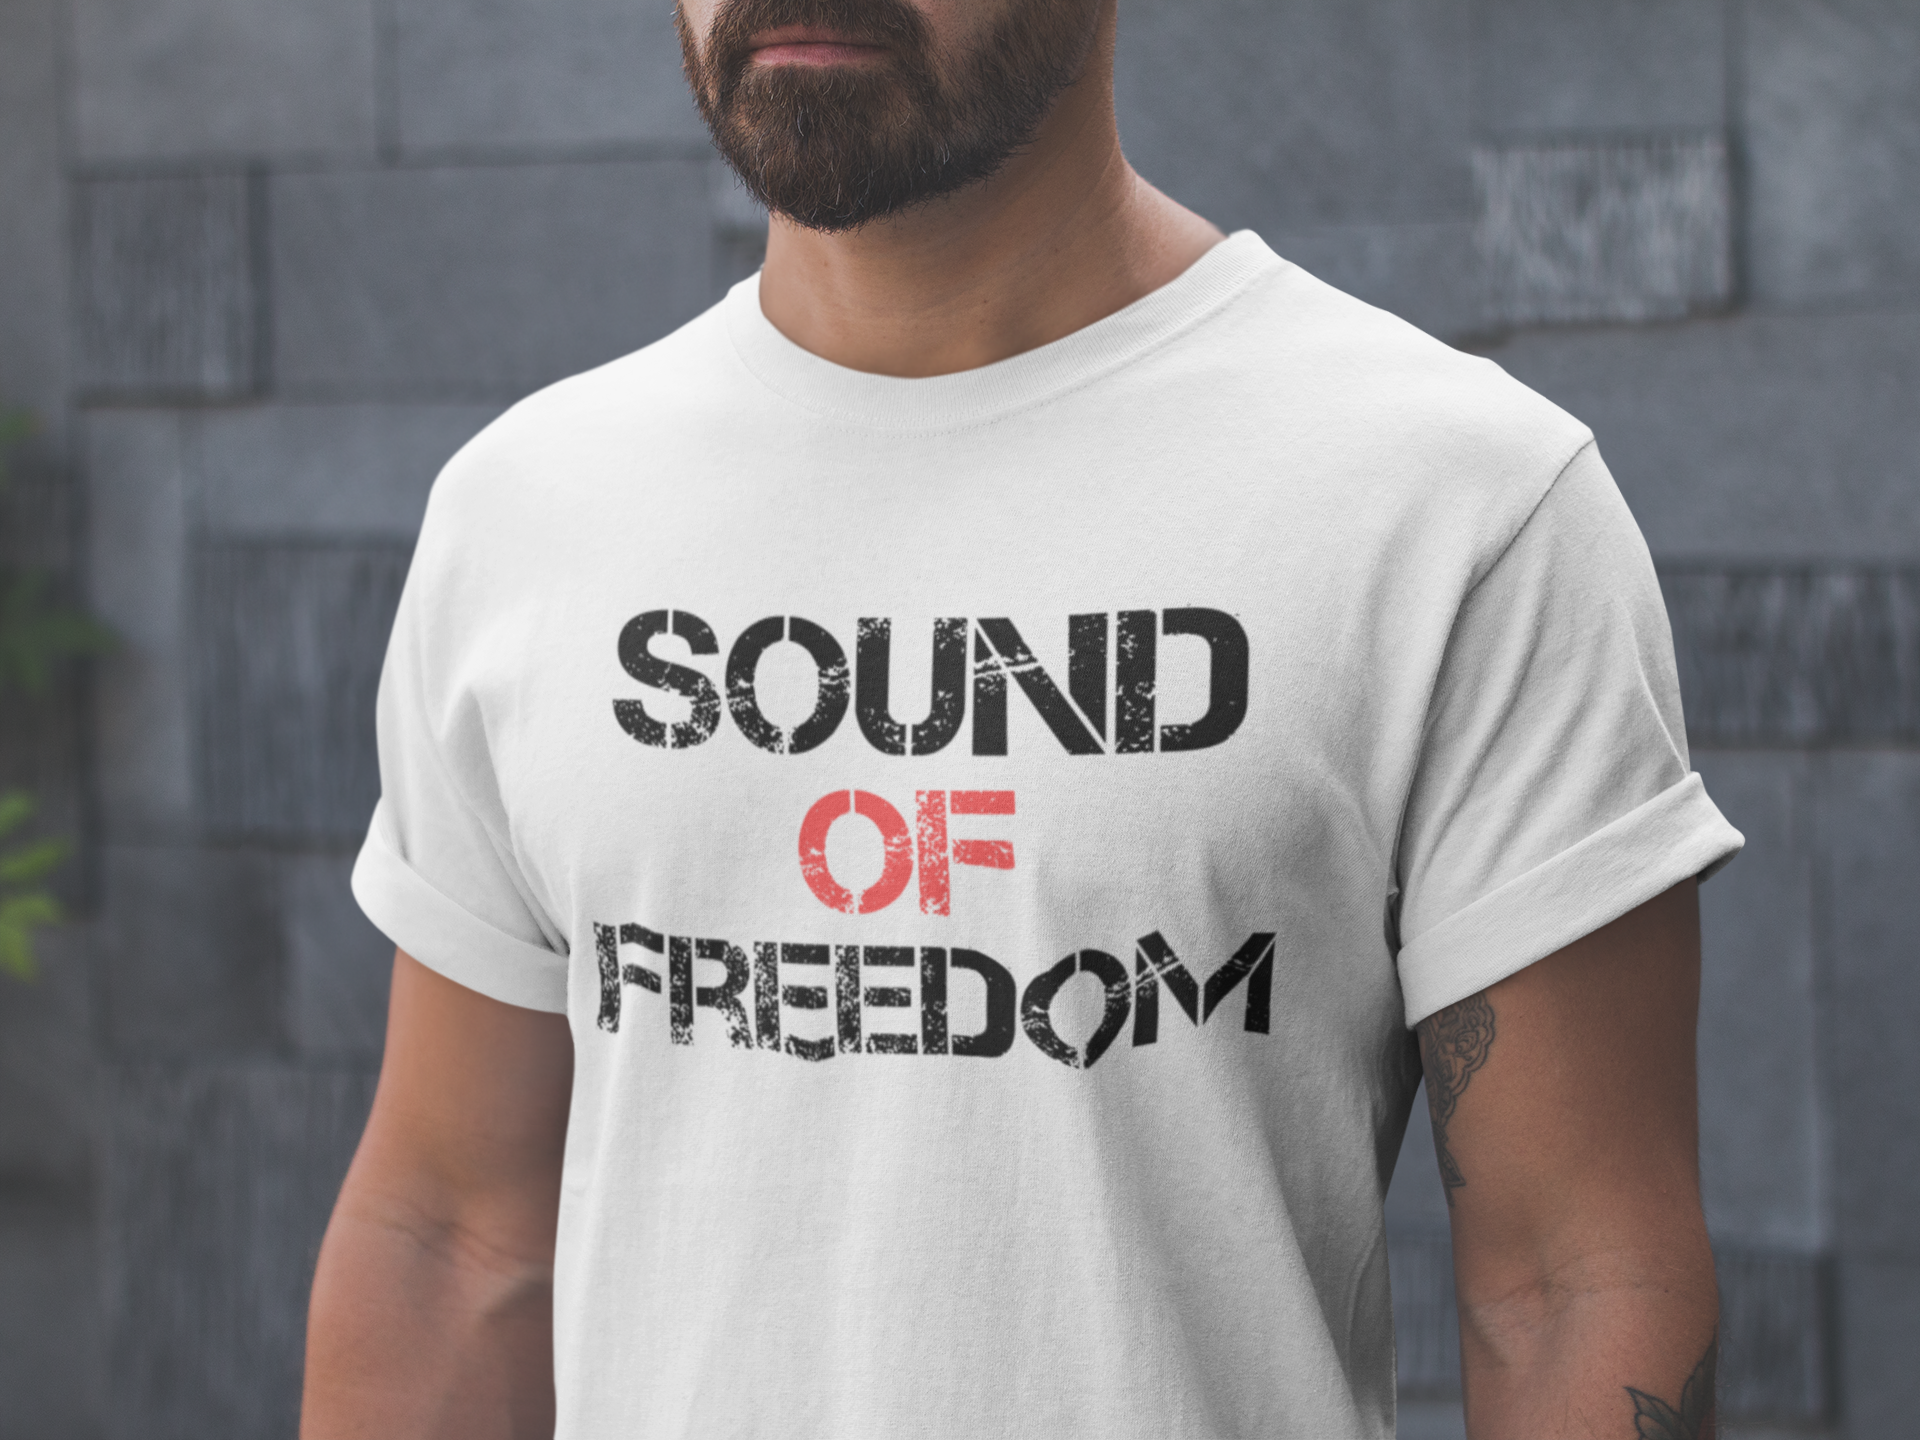 Sound Of Freedom T-Shirt Men. Save Our Children. Stop Childtrafficking